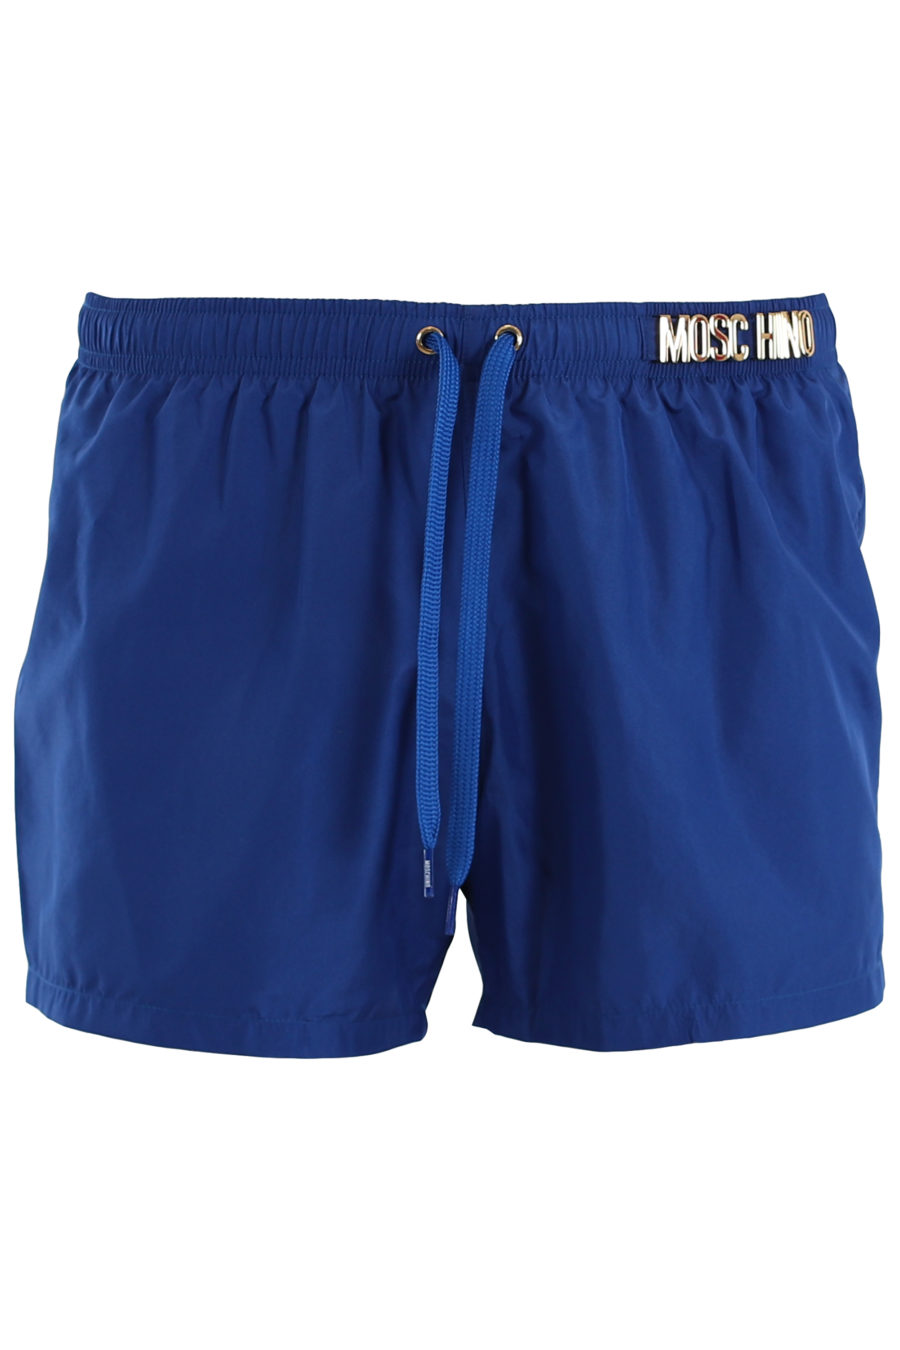 Blue swimming costume with gold lettering logo in metal - IMG 9526